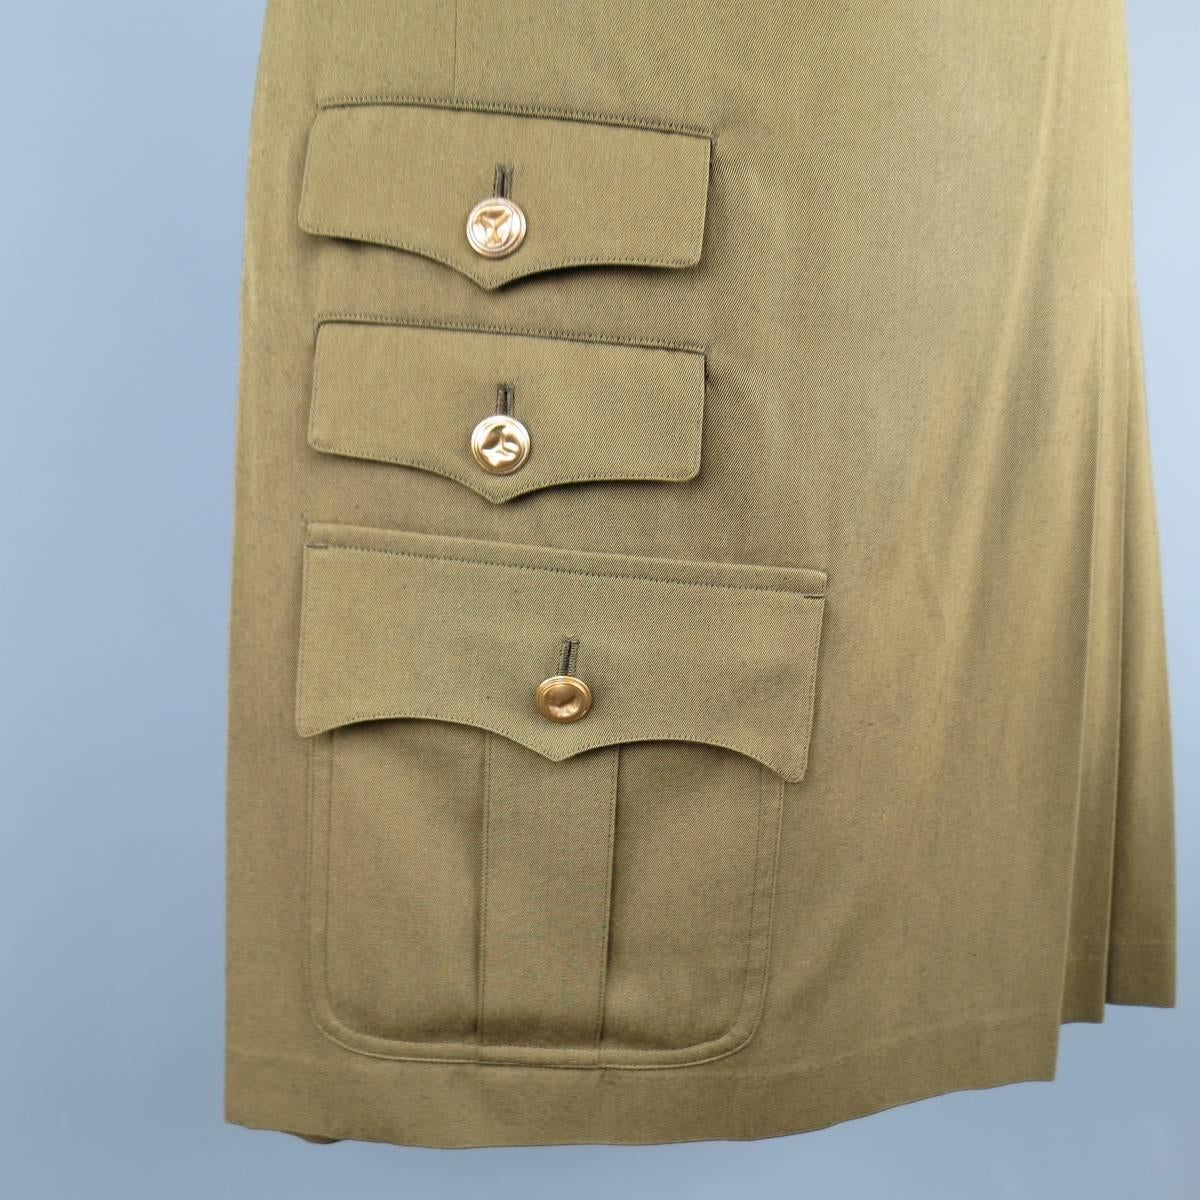 COMME des GARCONS Spring/Summer 2015 collection kilt shorts in a light olive green wool twill featuring a half pleated skirt with leather buckle tab closure, frontal military pockets with crushed gold brass buttons, and classic Bermuda short back.